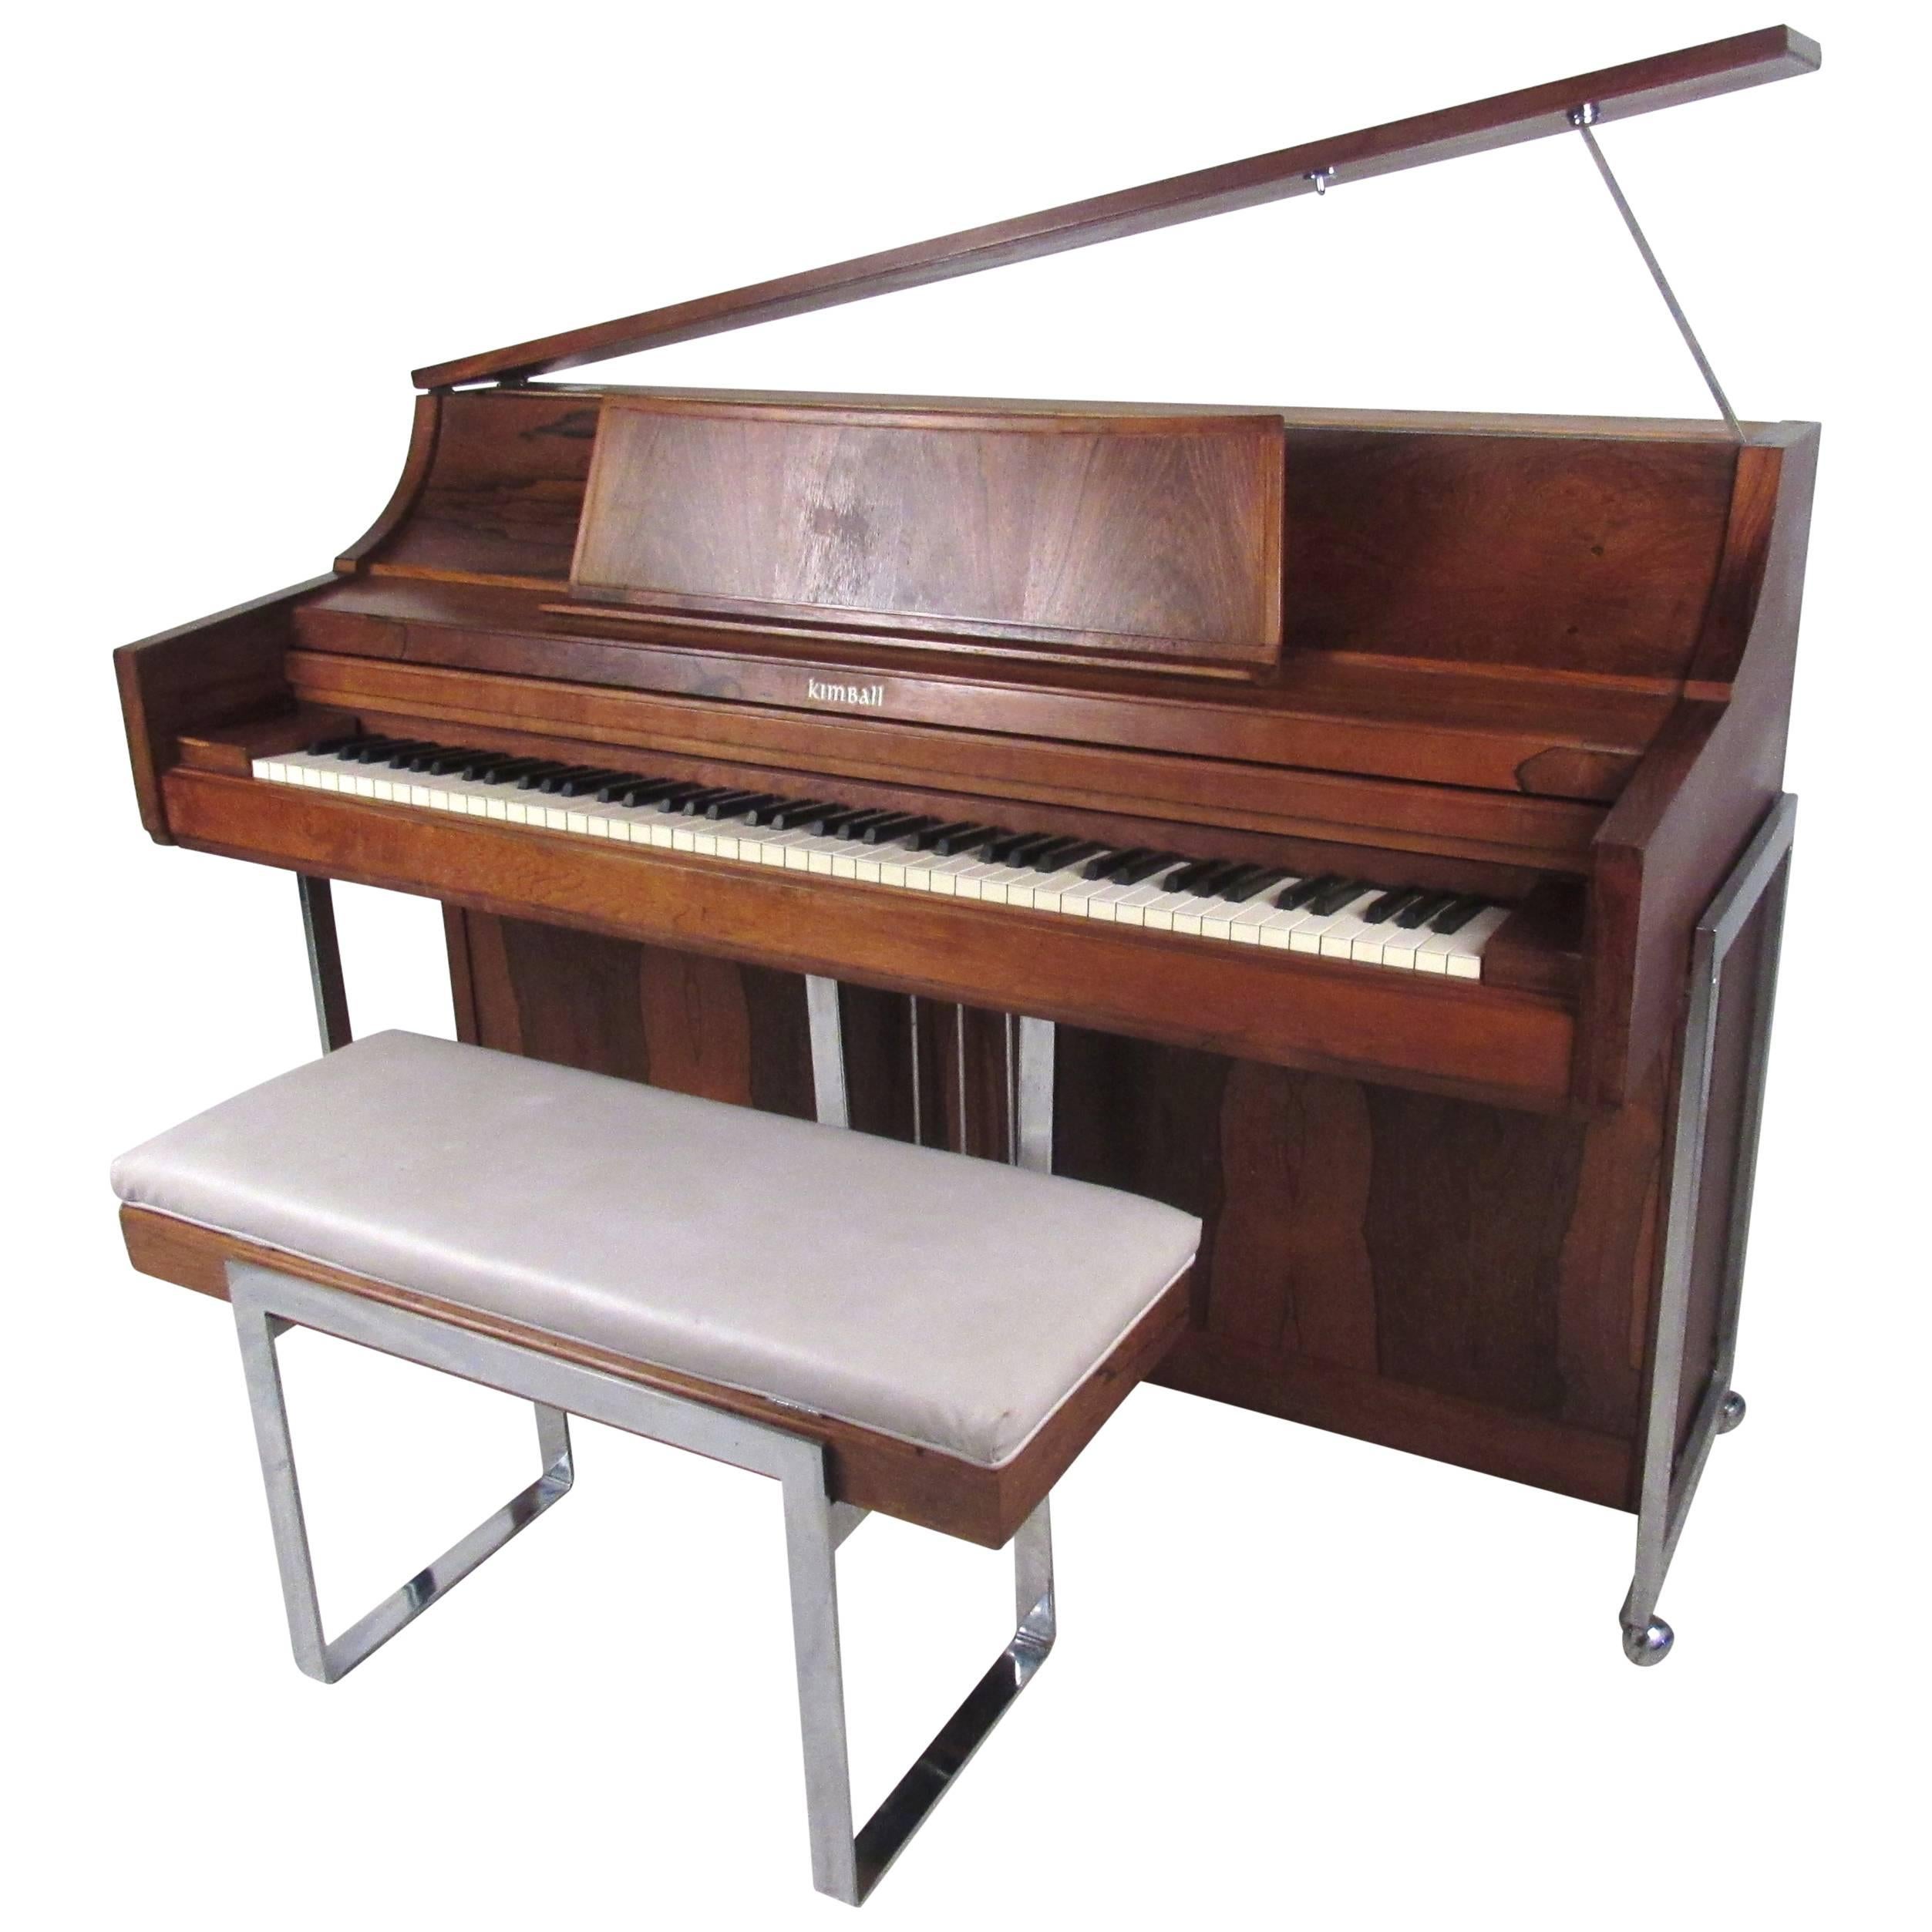 Exquisite Midcentury Rosewood Piano by Kimball